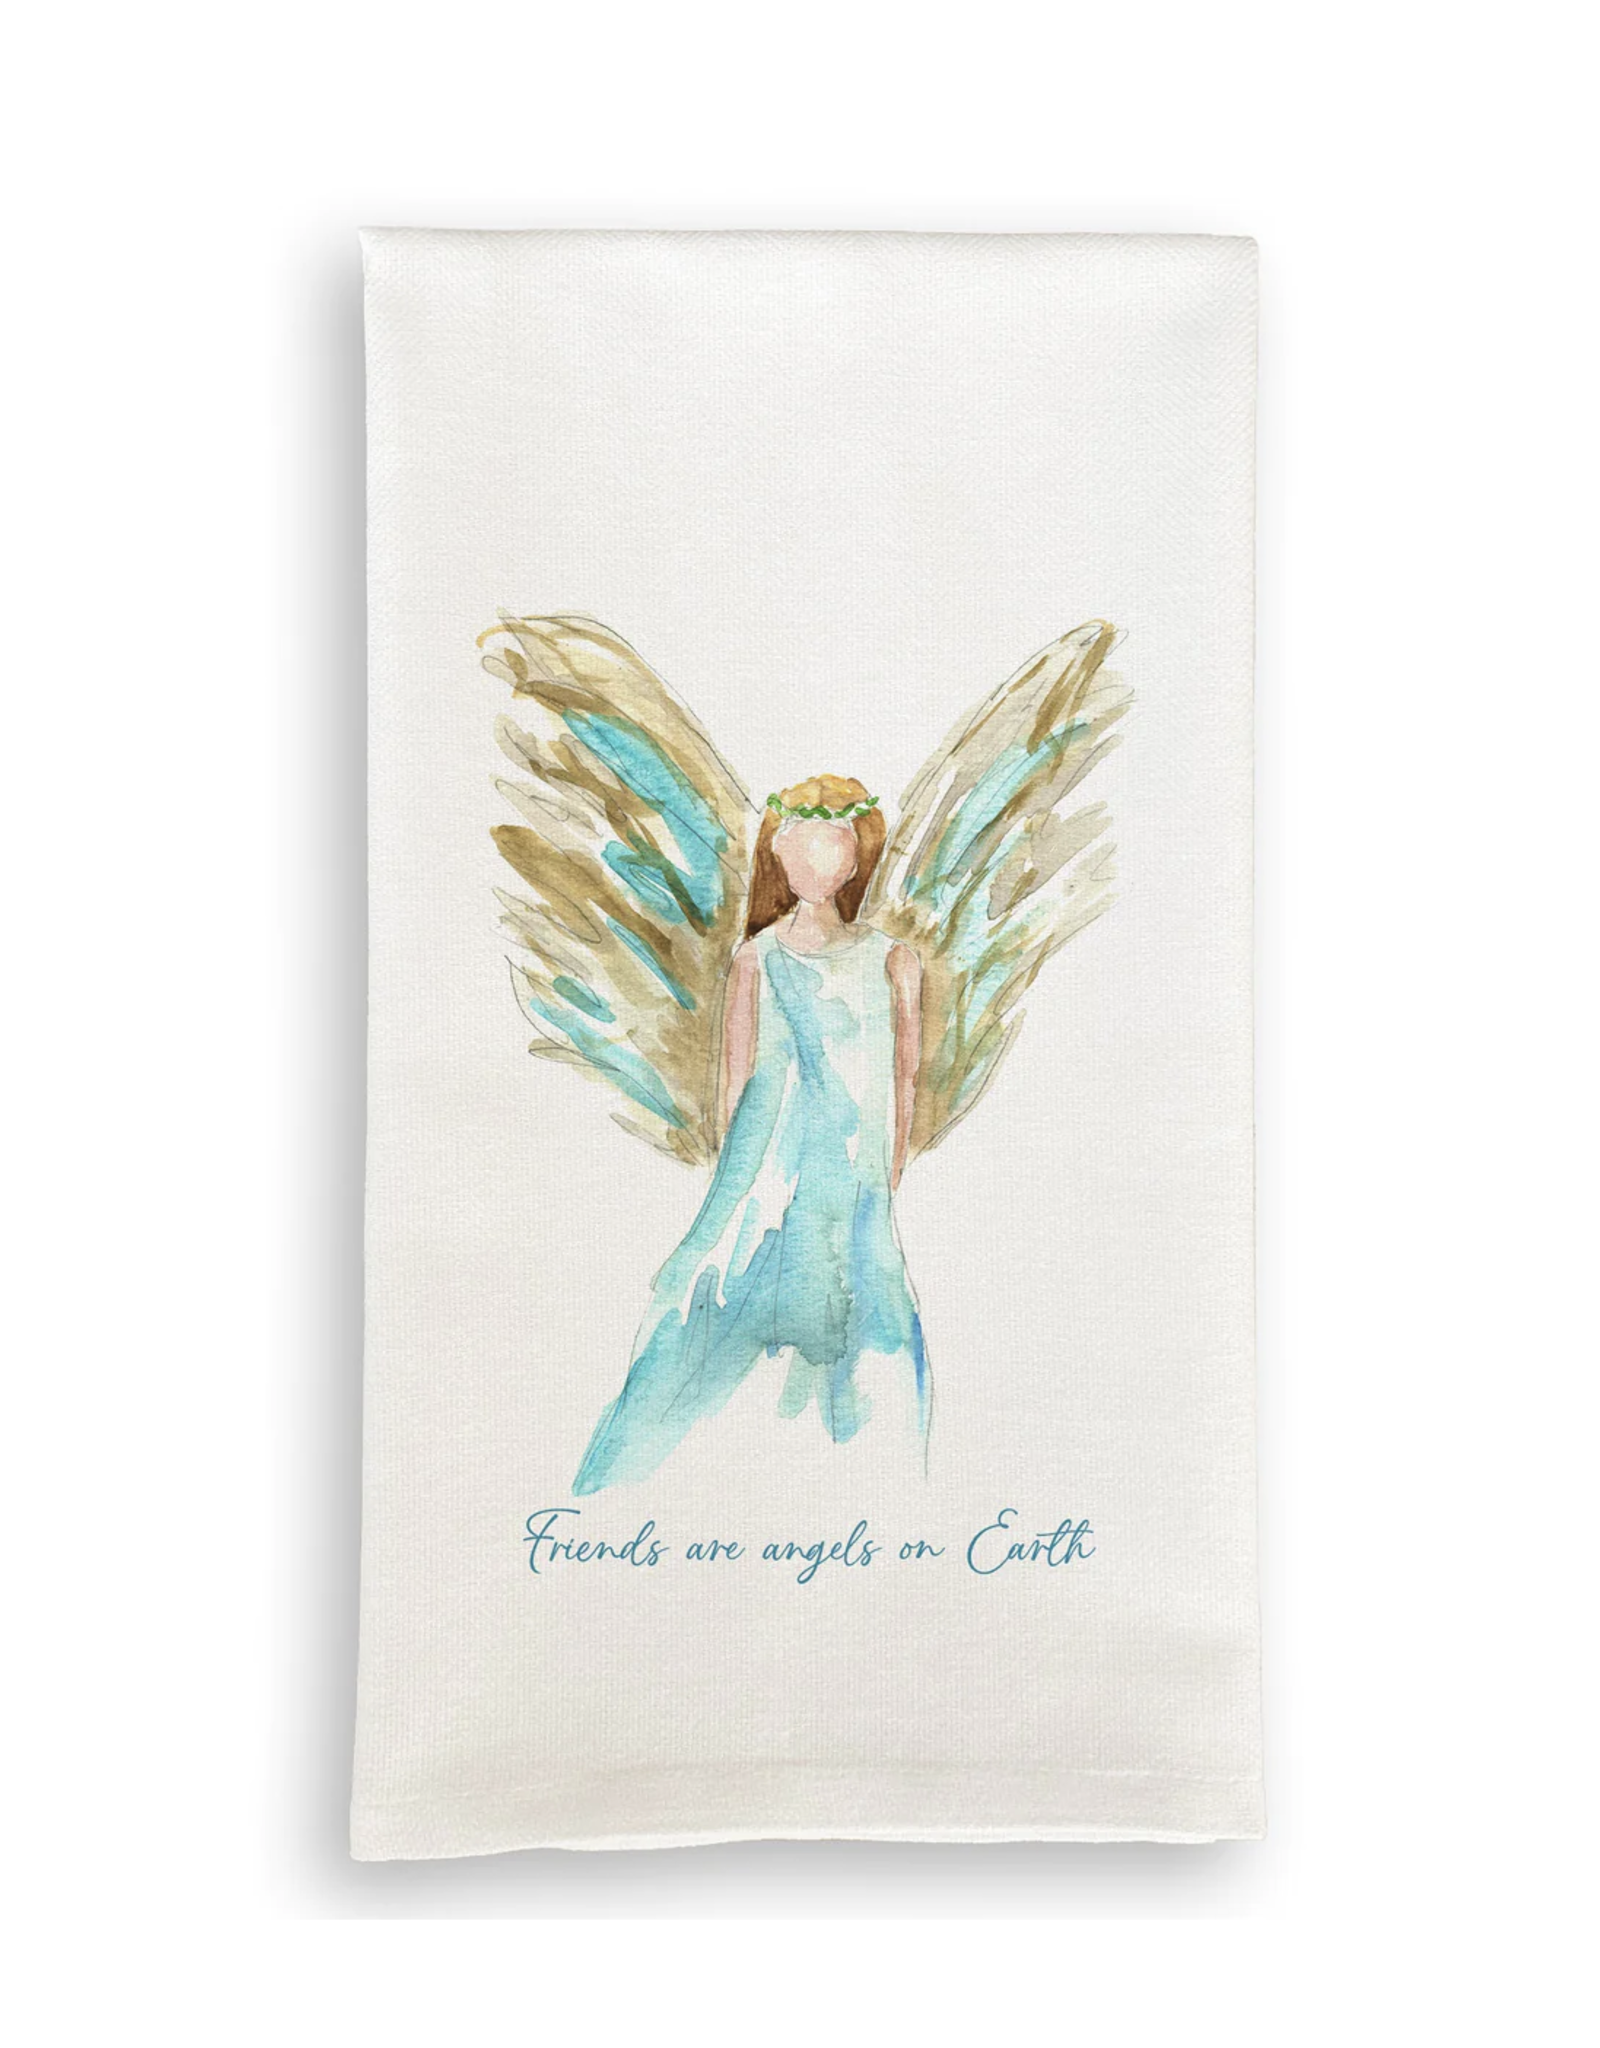 Towel - Blue Celestial Angel (Friends are Angels on Earth)